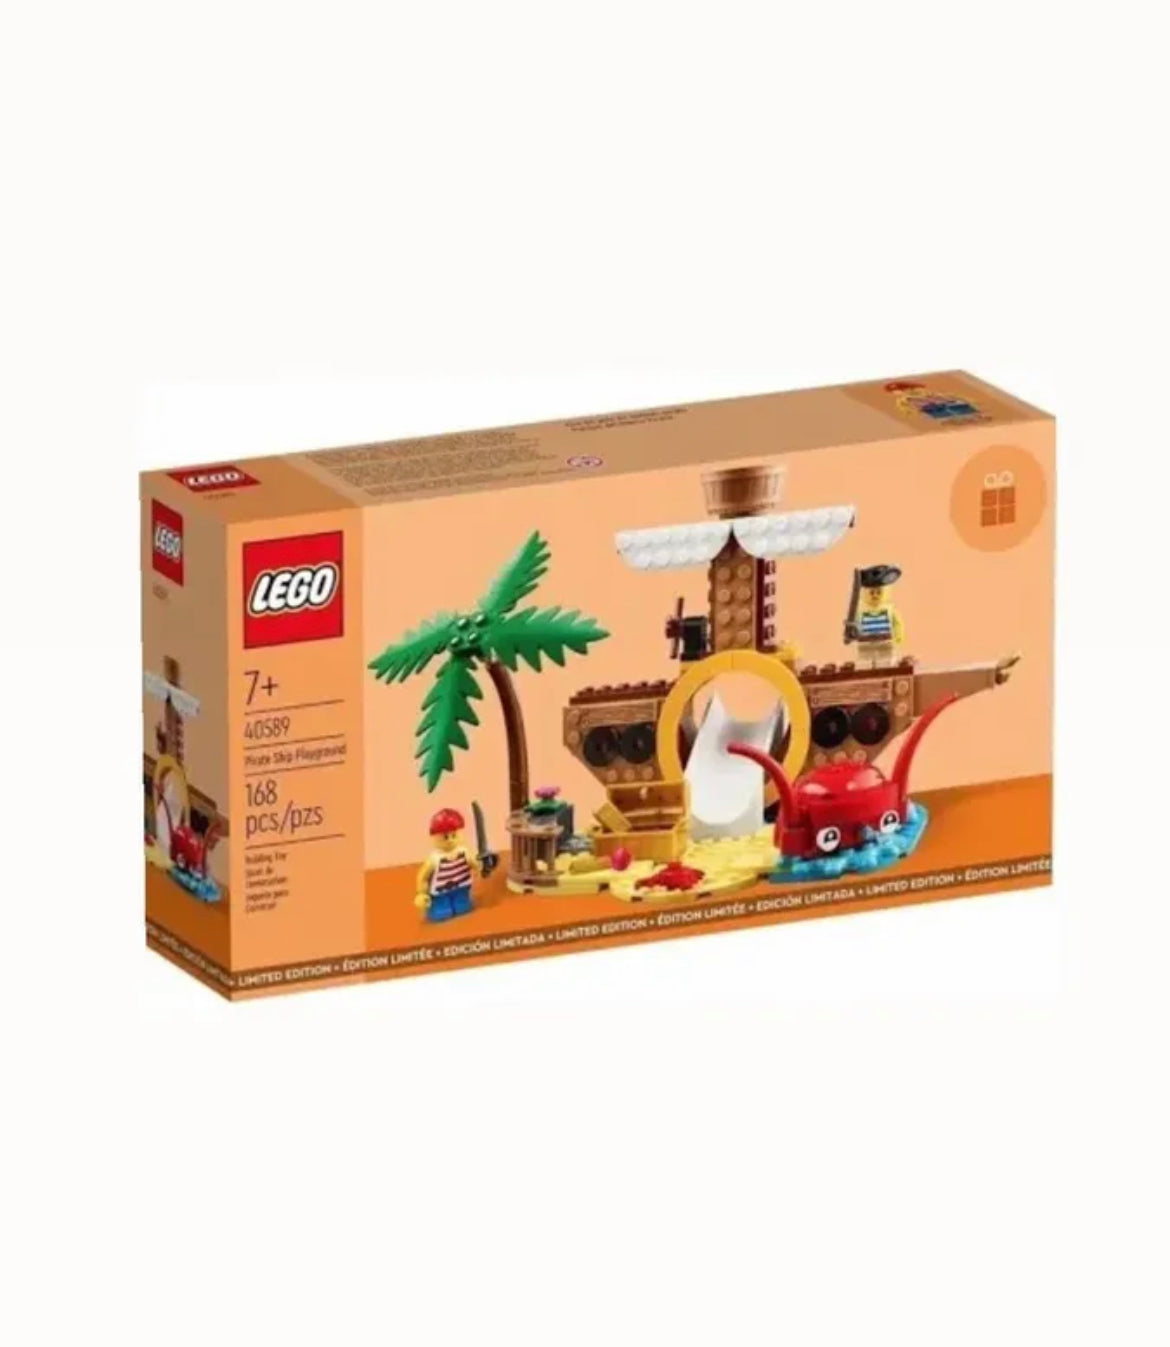 Lego Limited Edition ‘Pirate Ship Playground’ Set 40589